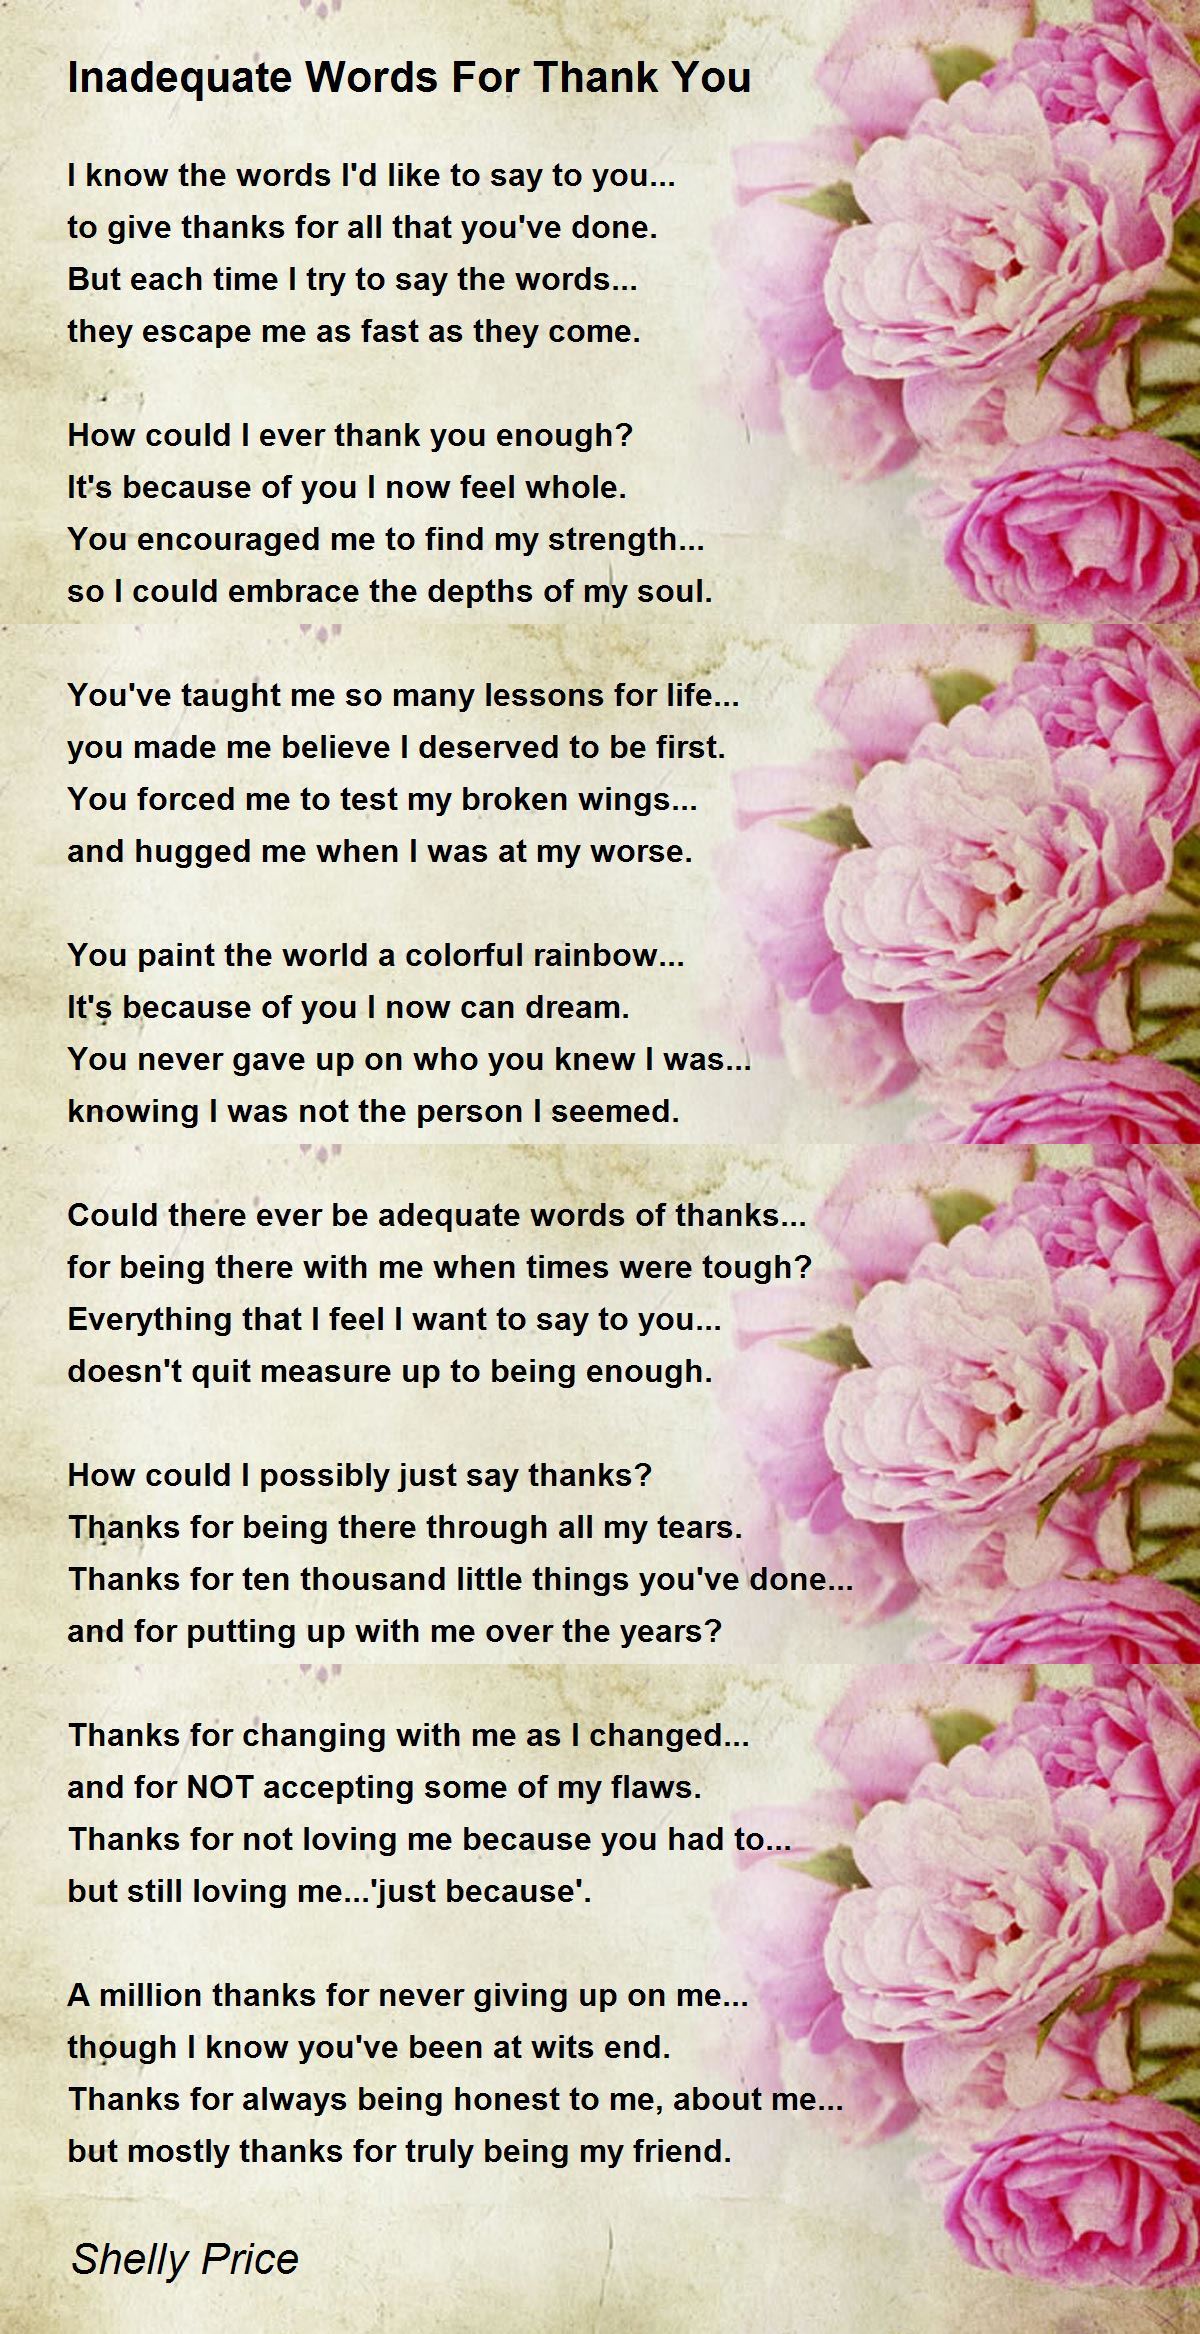 Inadequate Words For Thank You - Inadequate Words For Thank You Poem by ...